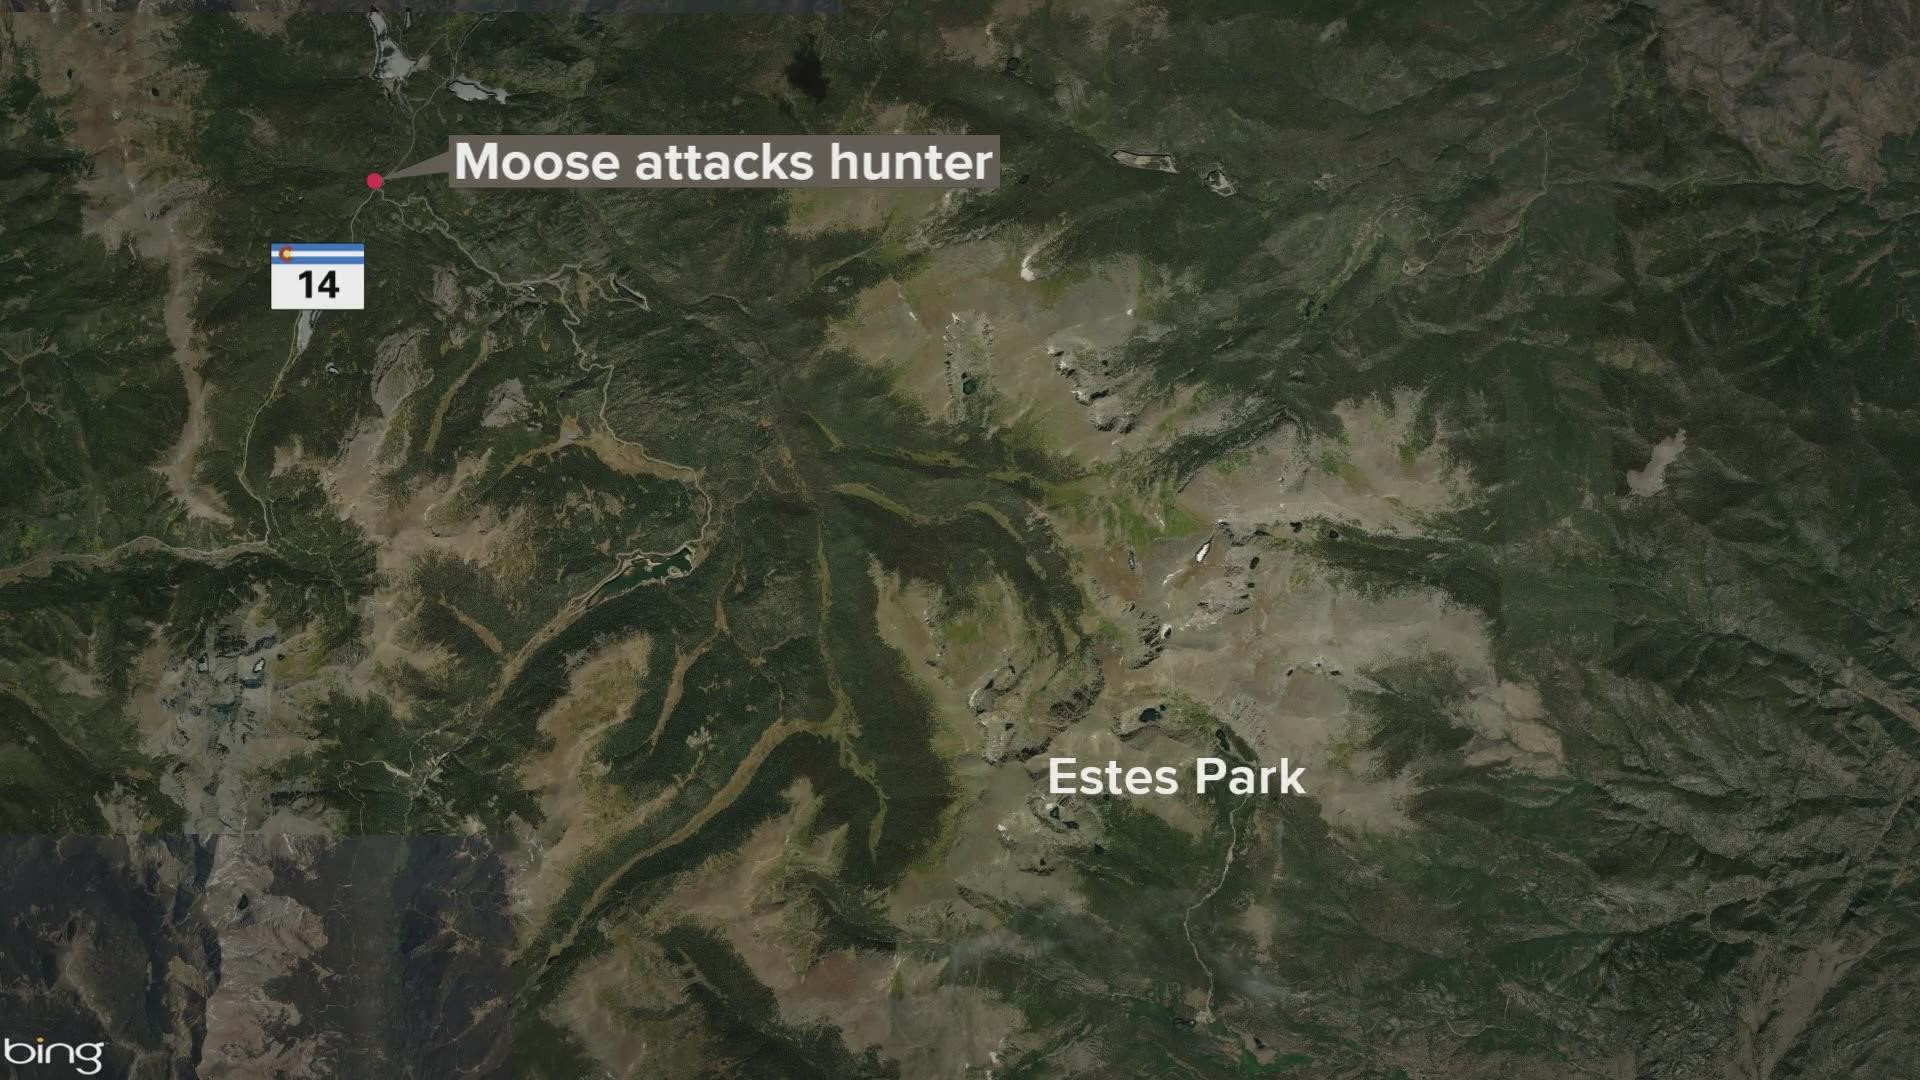 Rescuers with the Larimer County Sheriff's Office said the hunter tried to shoot a moose with an arrow, missed and was attacked by the animal.